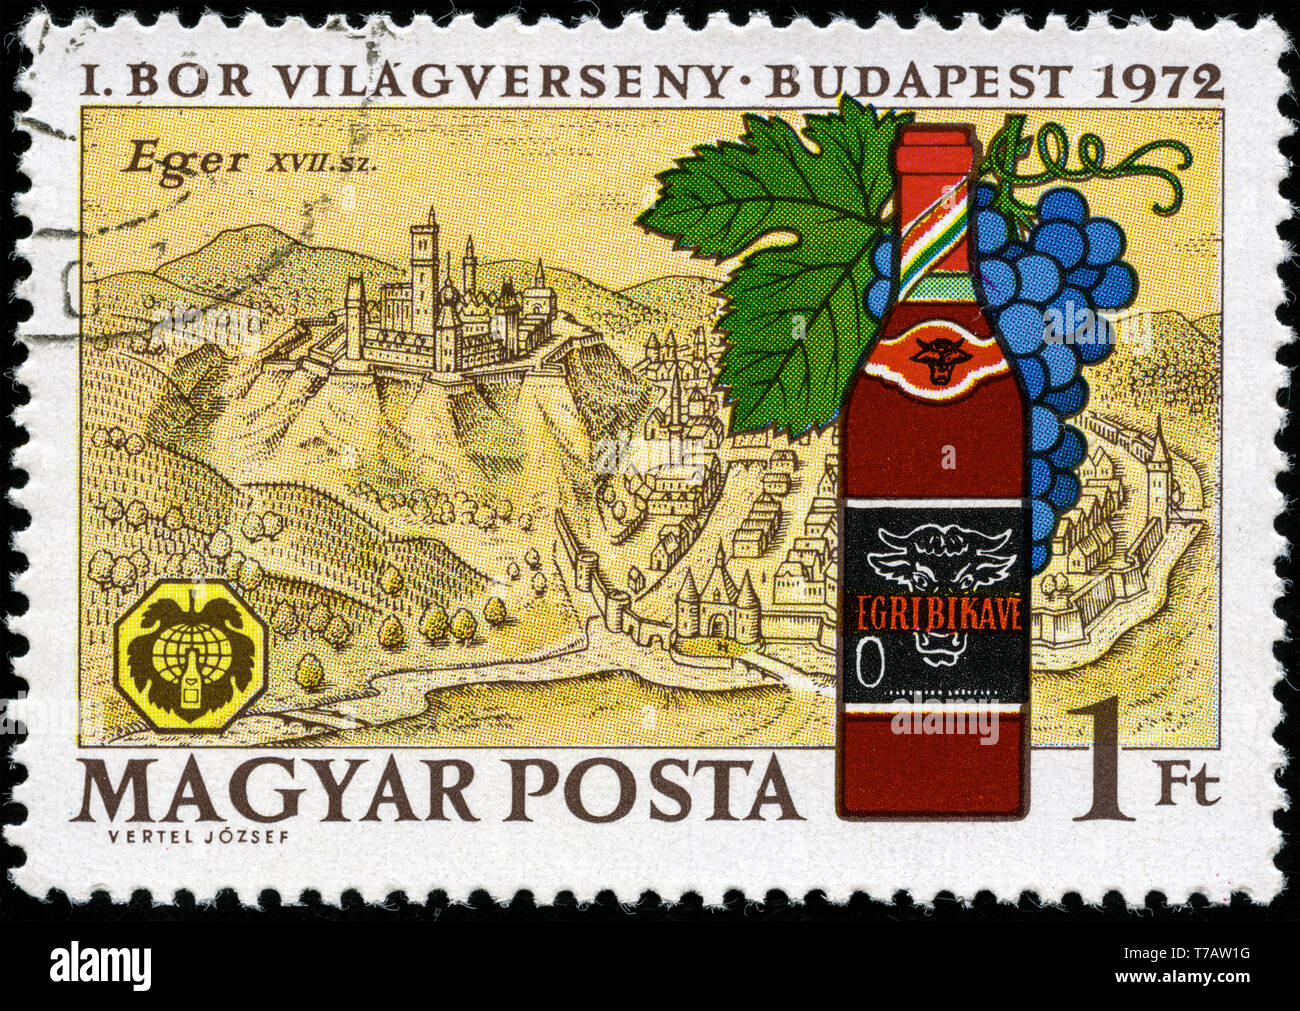 Postage stamp from Hungary in the Hungarian Wine Regions series issued in 1972 Stock Photo